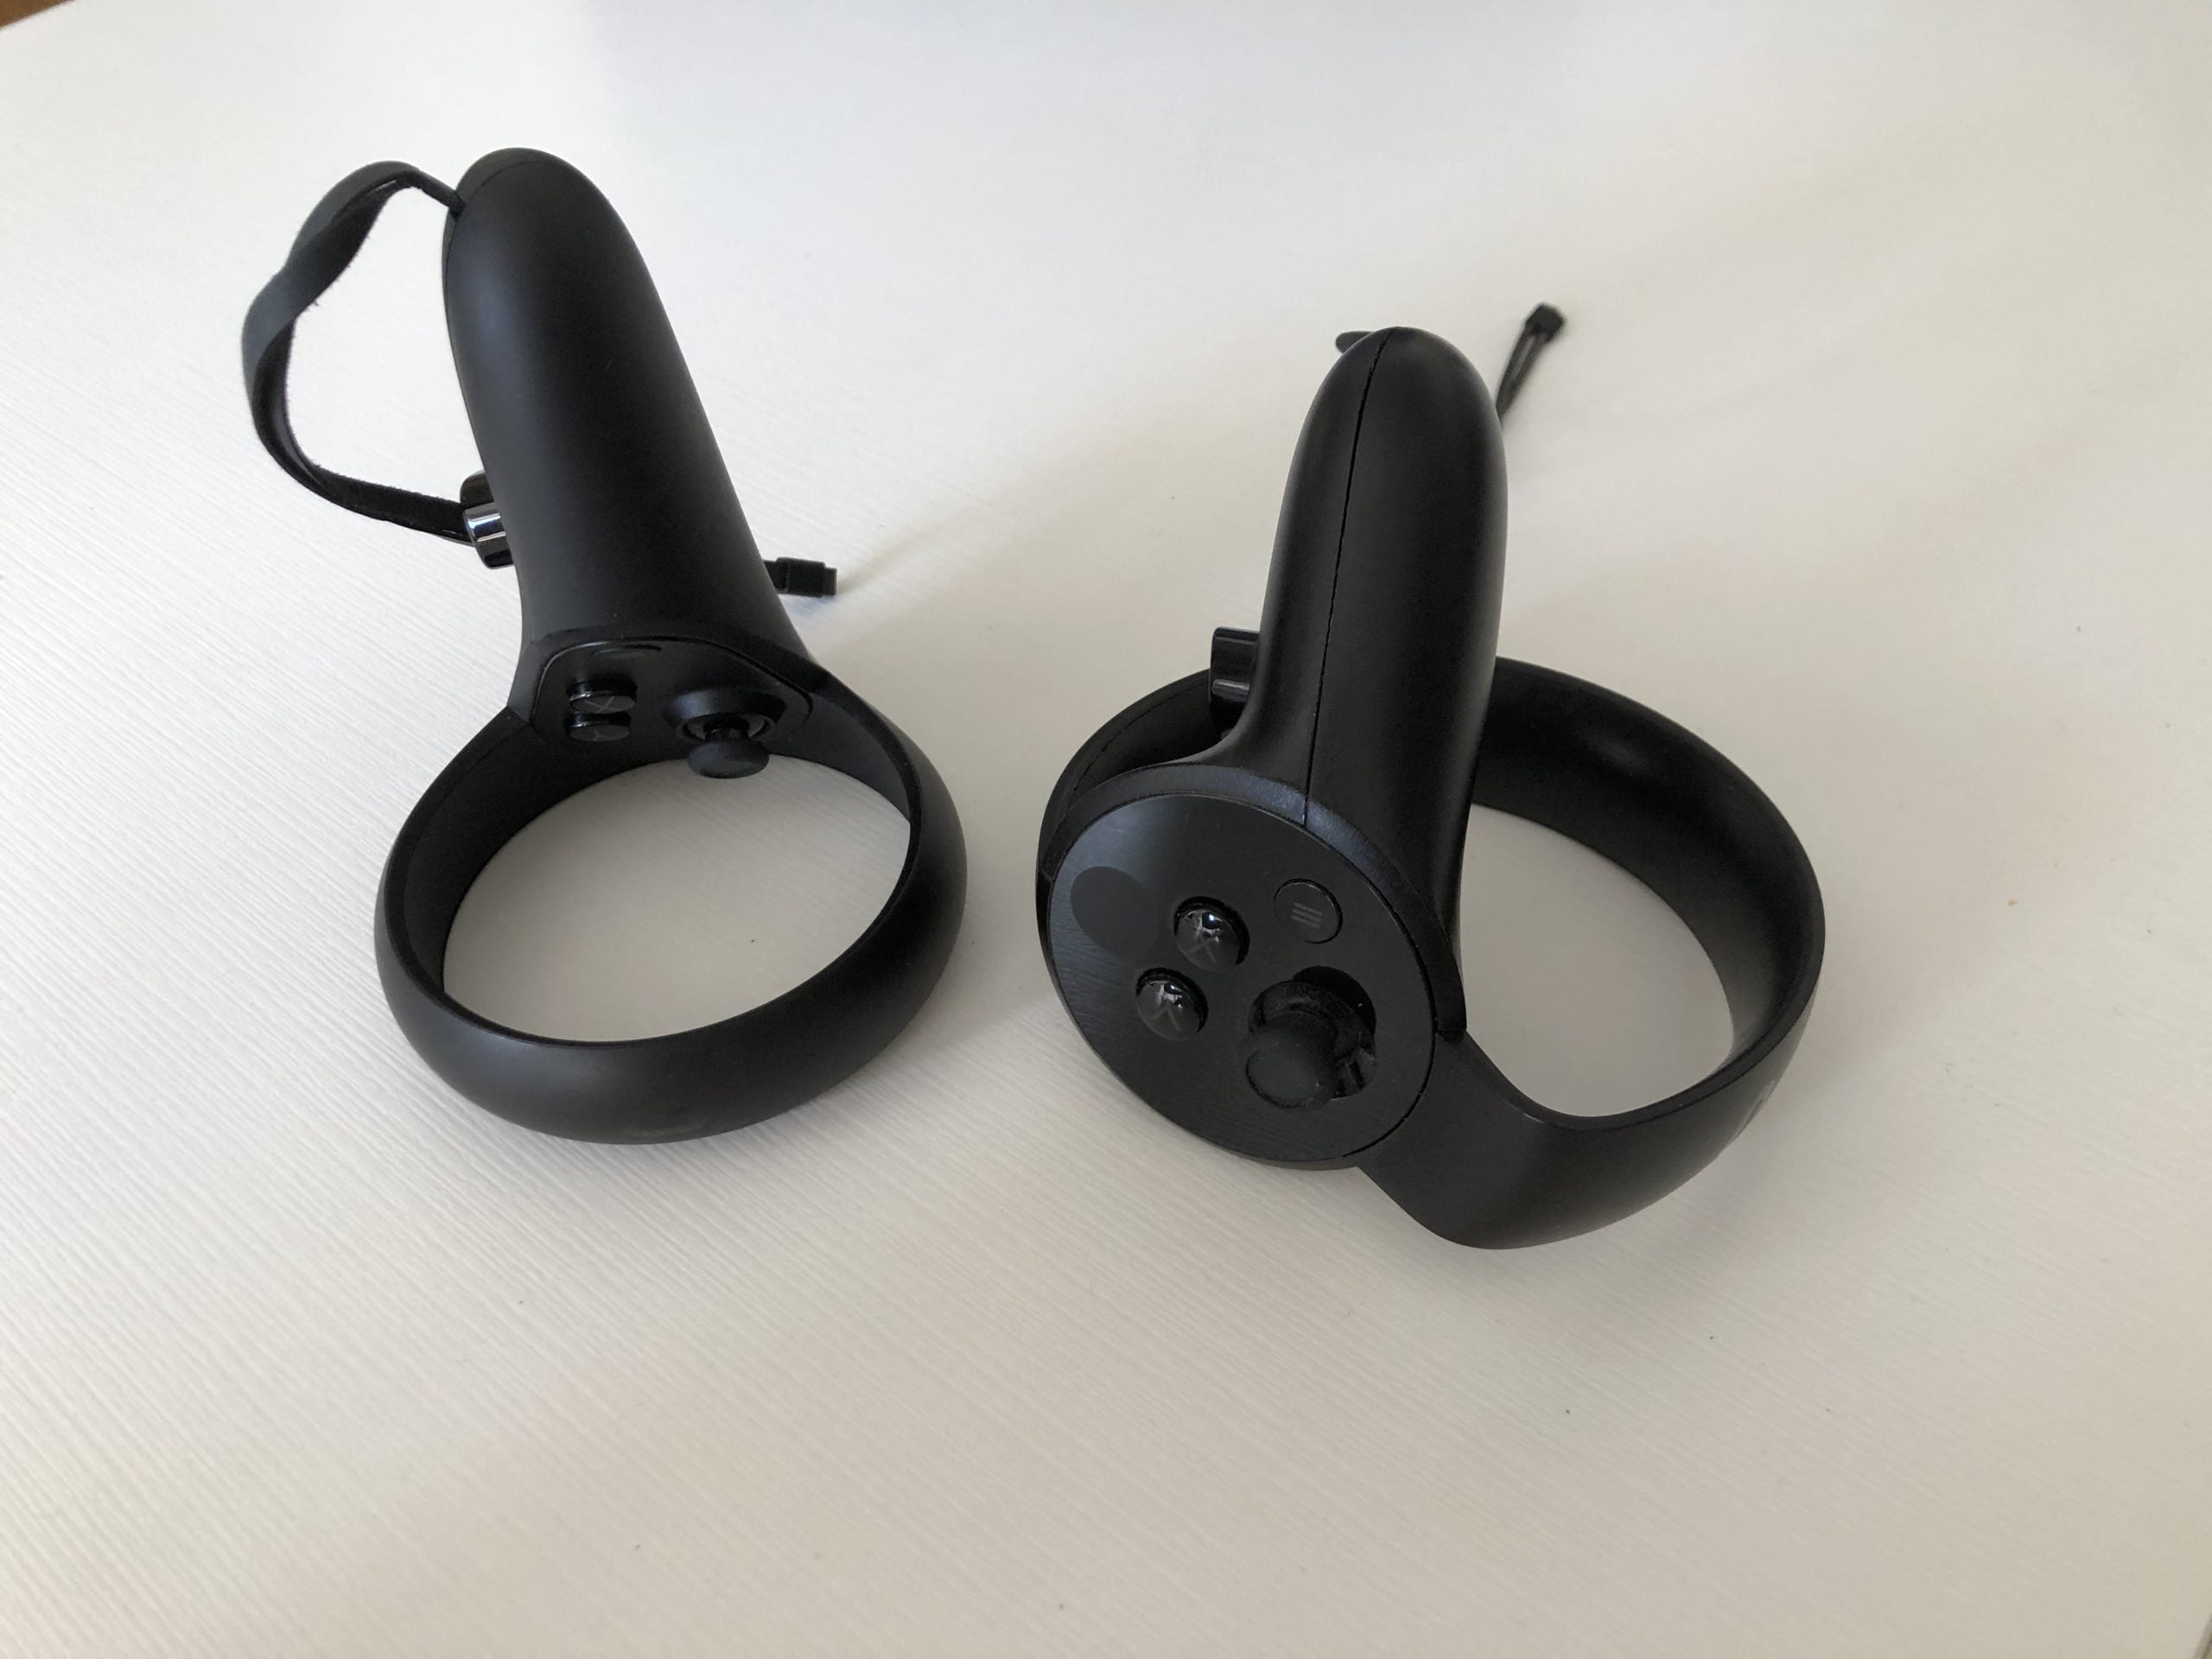 Oculus Touch old and new controllers